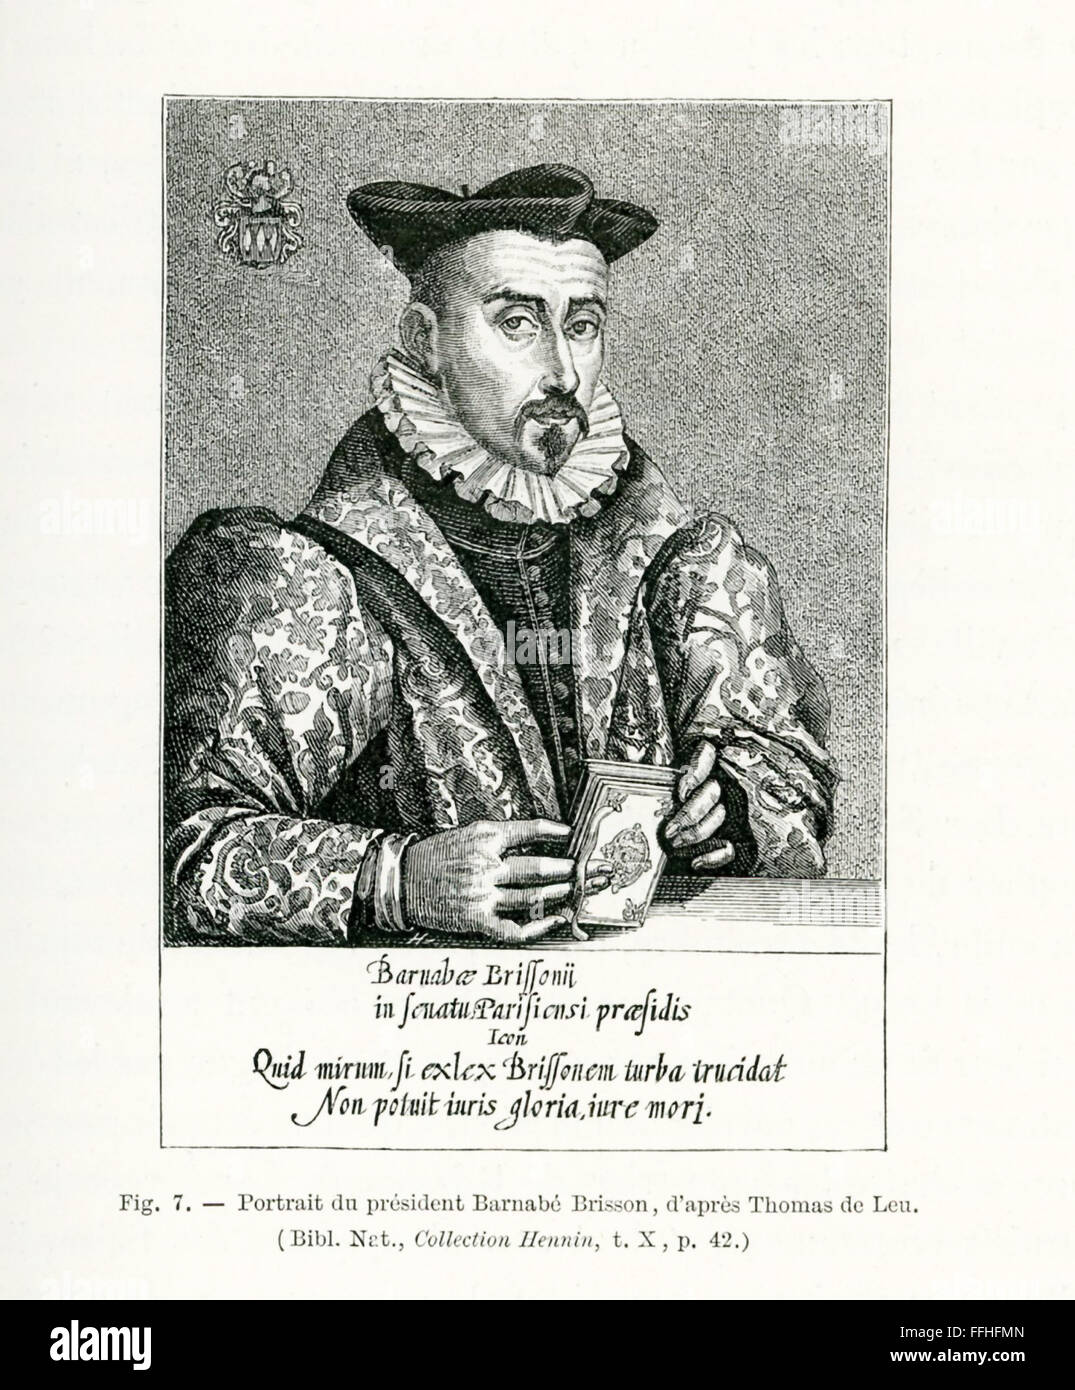 This portrait of Barnabe Brisson was done by Thomas de Leu. Brisson was a French jurist and politician. He lived from 1531 to 1591. During the Wars of Religion—the Protestant Reformation—he became the president of the Parlement, installed by the League (known as the Catholic League and the Holy League). Stock Photo